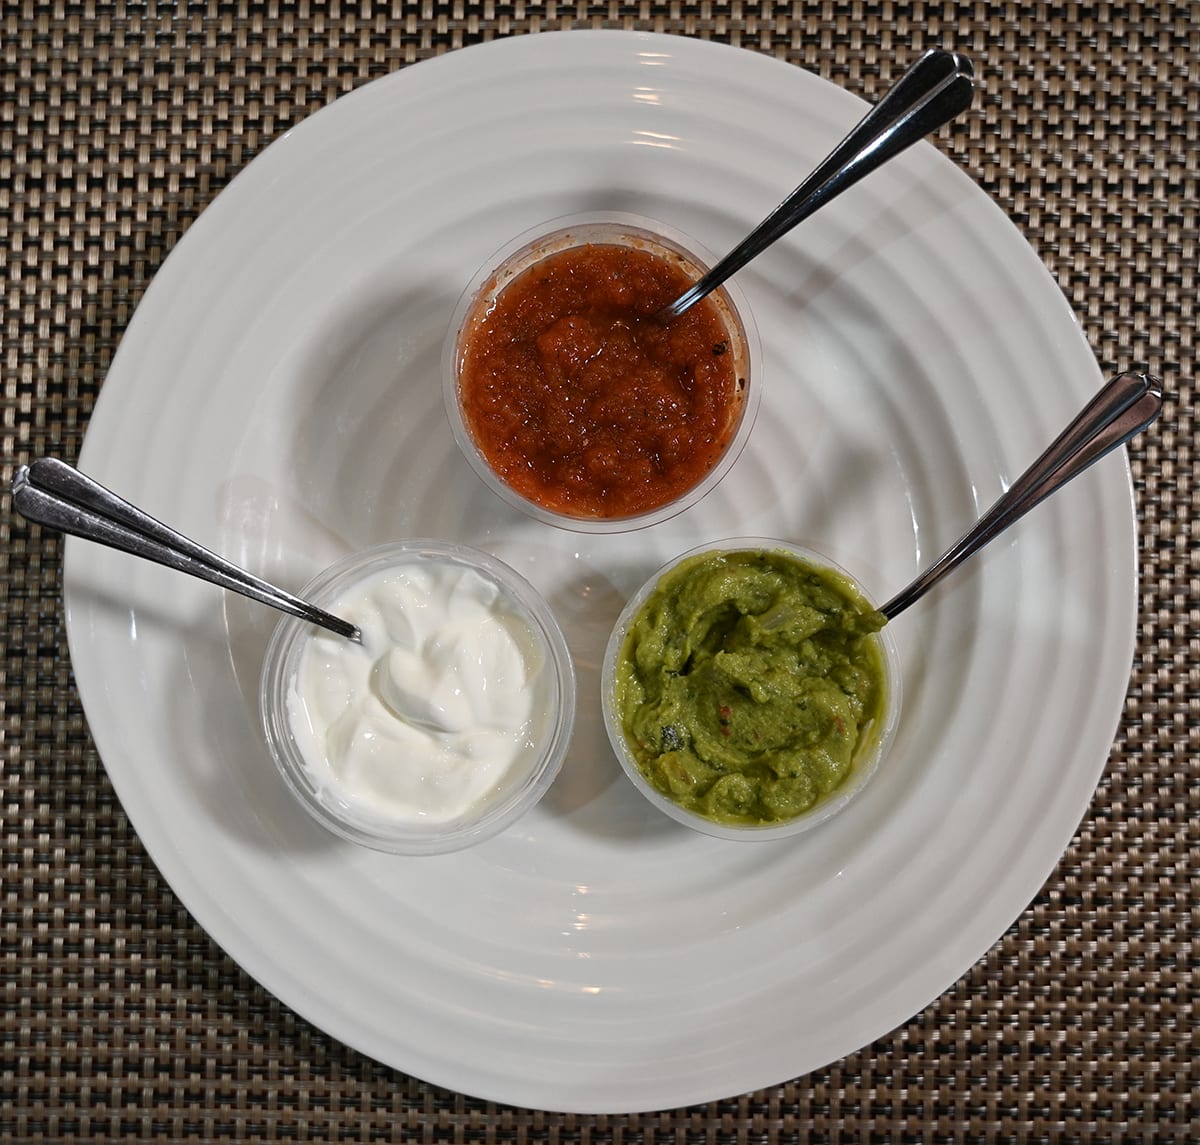 Top down image of the salsa, sour cream and guacamole containers sitting on a white plate with spoons in them.